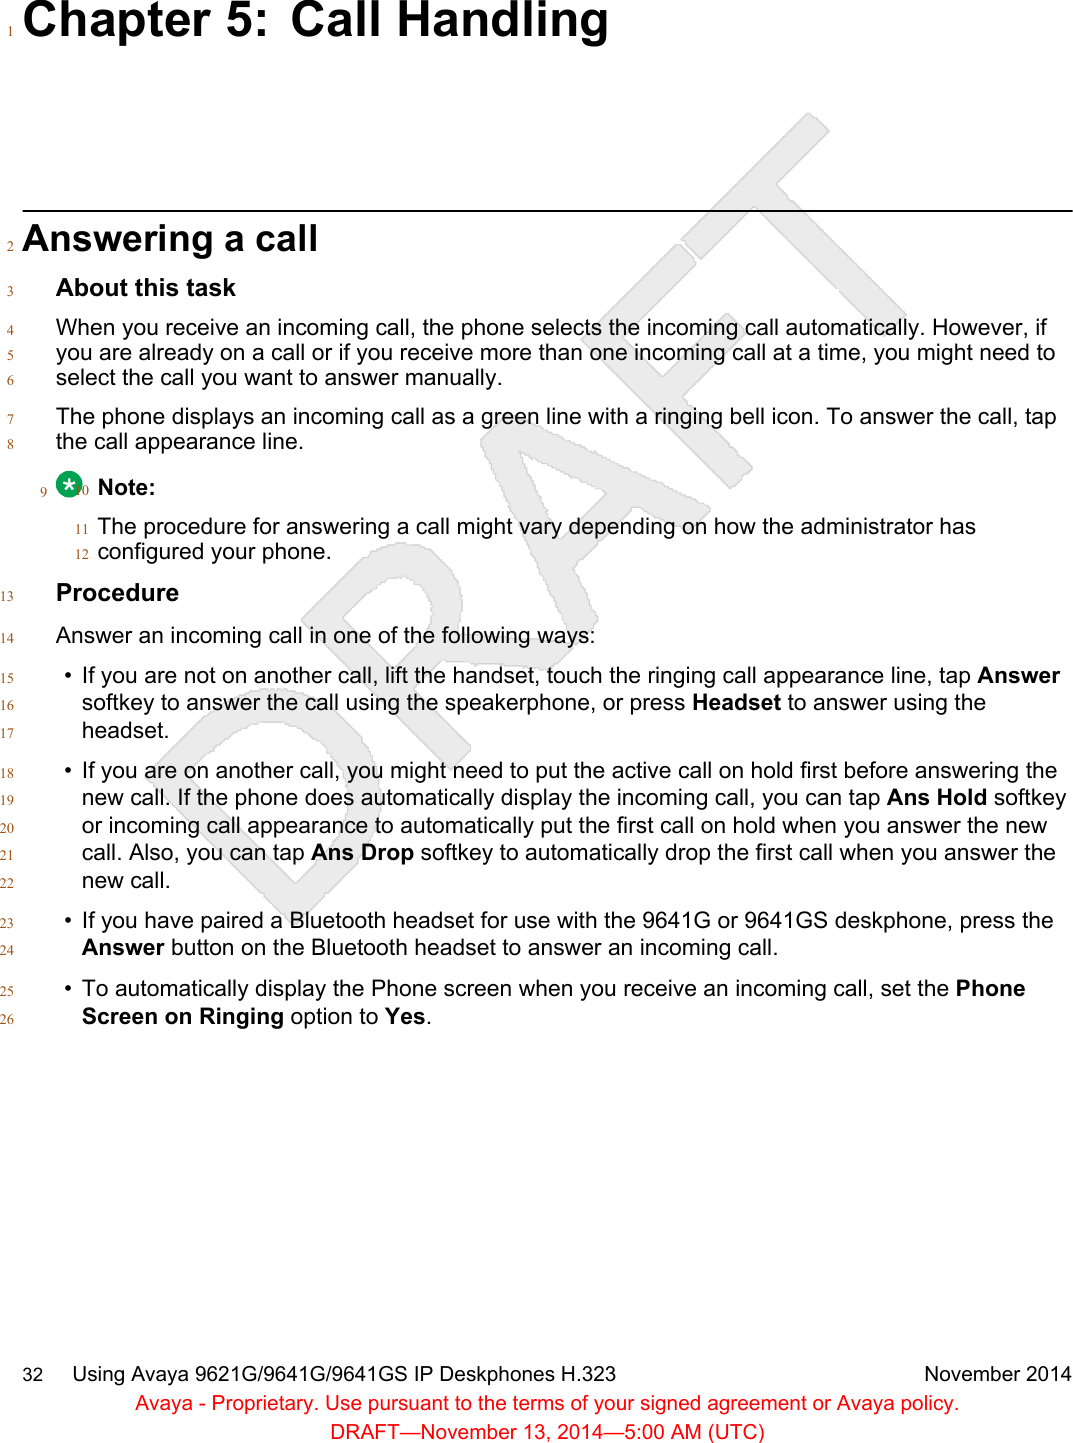 Chapter 5: Call Handling1Answering a call2About this task3When you receive an incoming call, the phone selects the incoming call automatically. However, if4you are already on a call or if you receive more than one incoming call at a time, you might need to5select the call you want to answer manually.6The phone displays an incoming call as a green line with a ringing bell icon. To answer the call, tap7the call appearance line.89Note:10The procedure for answering a call might vary depending on how the administrator has11configured your phone.12Procedure13Answer an incoming call in one of the following ways:14• If you are not on another call, lift the handset, touch the ringing call appearance line, tap Answer15softkey to answer the call using the speakerphone, or press Headset to answer using the16headset.17• If you are on another call, you might need to put the active call on hold first before answering the18new call. If the phone does automatically display the incoming call, you can tap Ans Hold softkey19or incoming call appearance to automatically put the first call on hold when you answer the new20call. Also, you can tap Ans Drop softkey to automatically drop the first call when you answer the21new call.22• If you have paired a Bluetooth headset for use with the 9641G or 9641GS deskphone, press the23Answer button on the Bluetooth headset to answer an incoming call.24• To automatically display the Phone screen when you receive an incoming call, set the Phone25Screen on Ringing option to Yes.2632     Using Avaya 9621G/9641G/9641GS IP Deskphones H.323 November 2014Avaya - Proprietary. Use pursuant to the terms of your signed agreement or Avaya policy.DRAFT—November 13, 2014—5:00 AM (UTC)